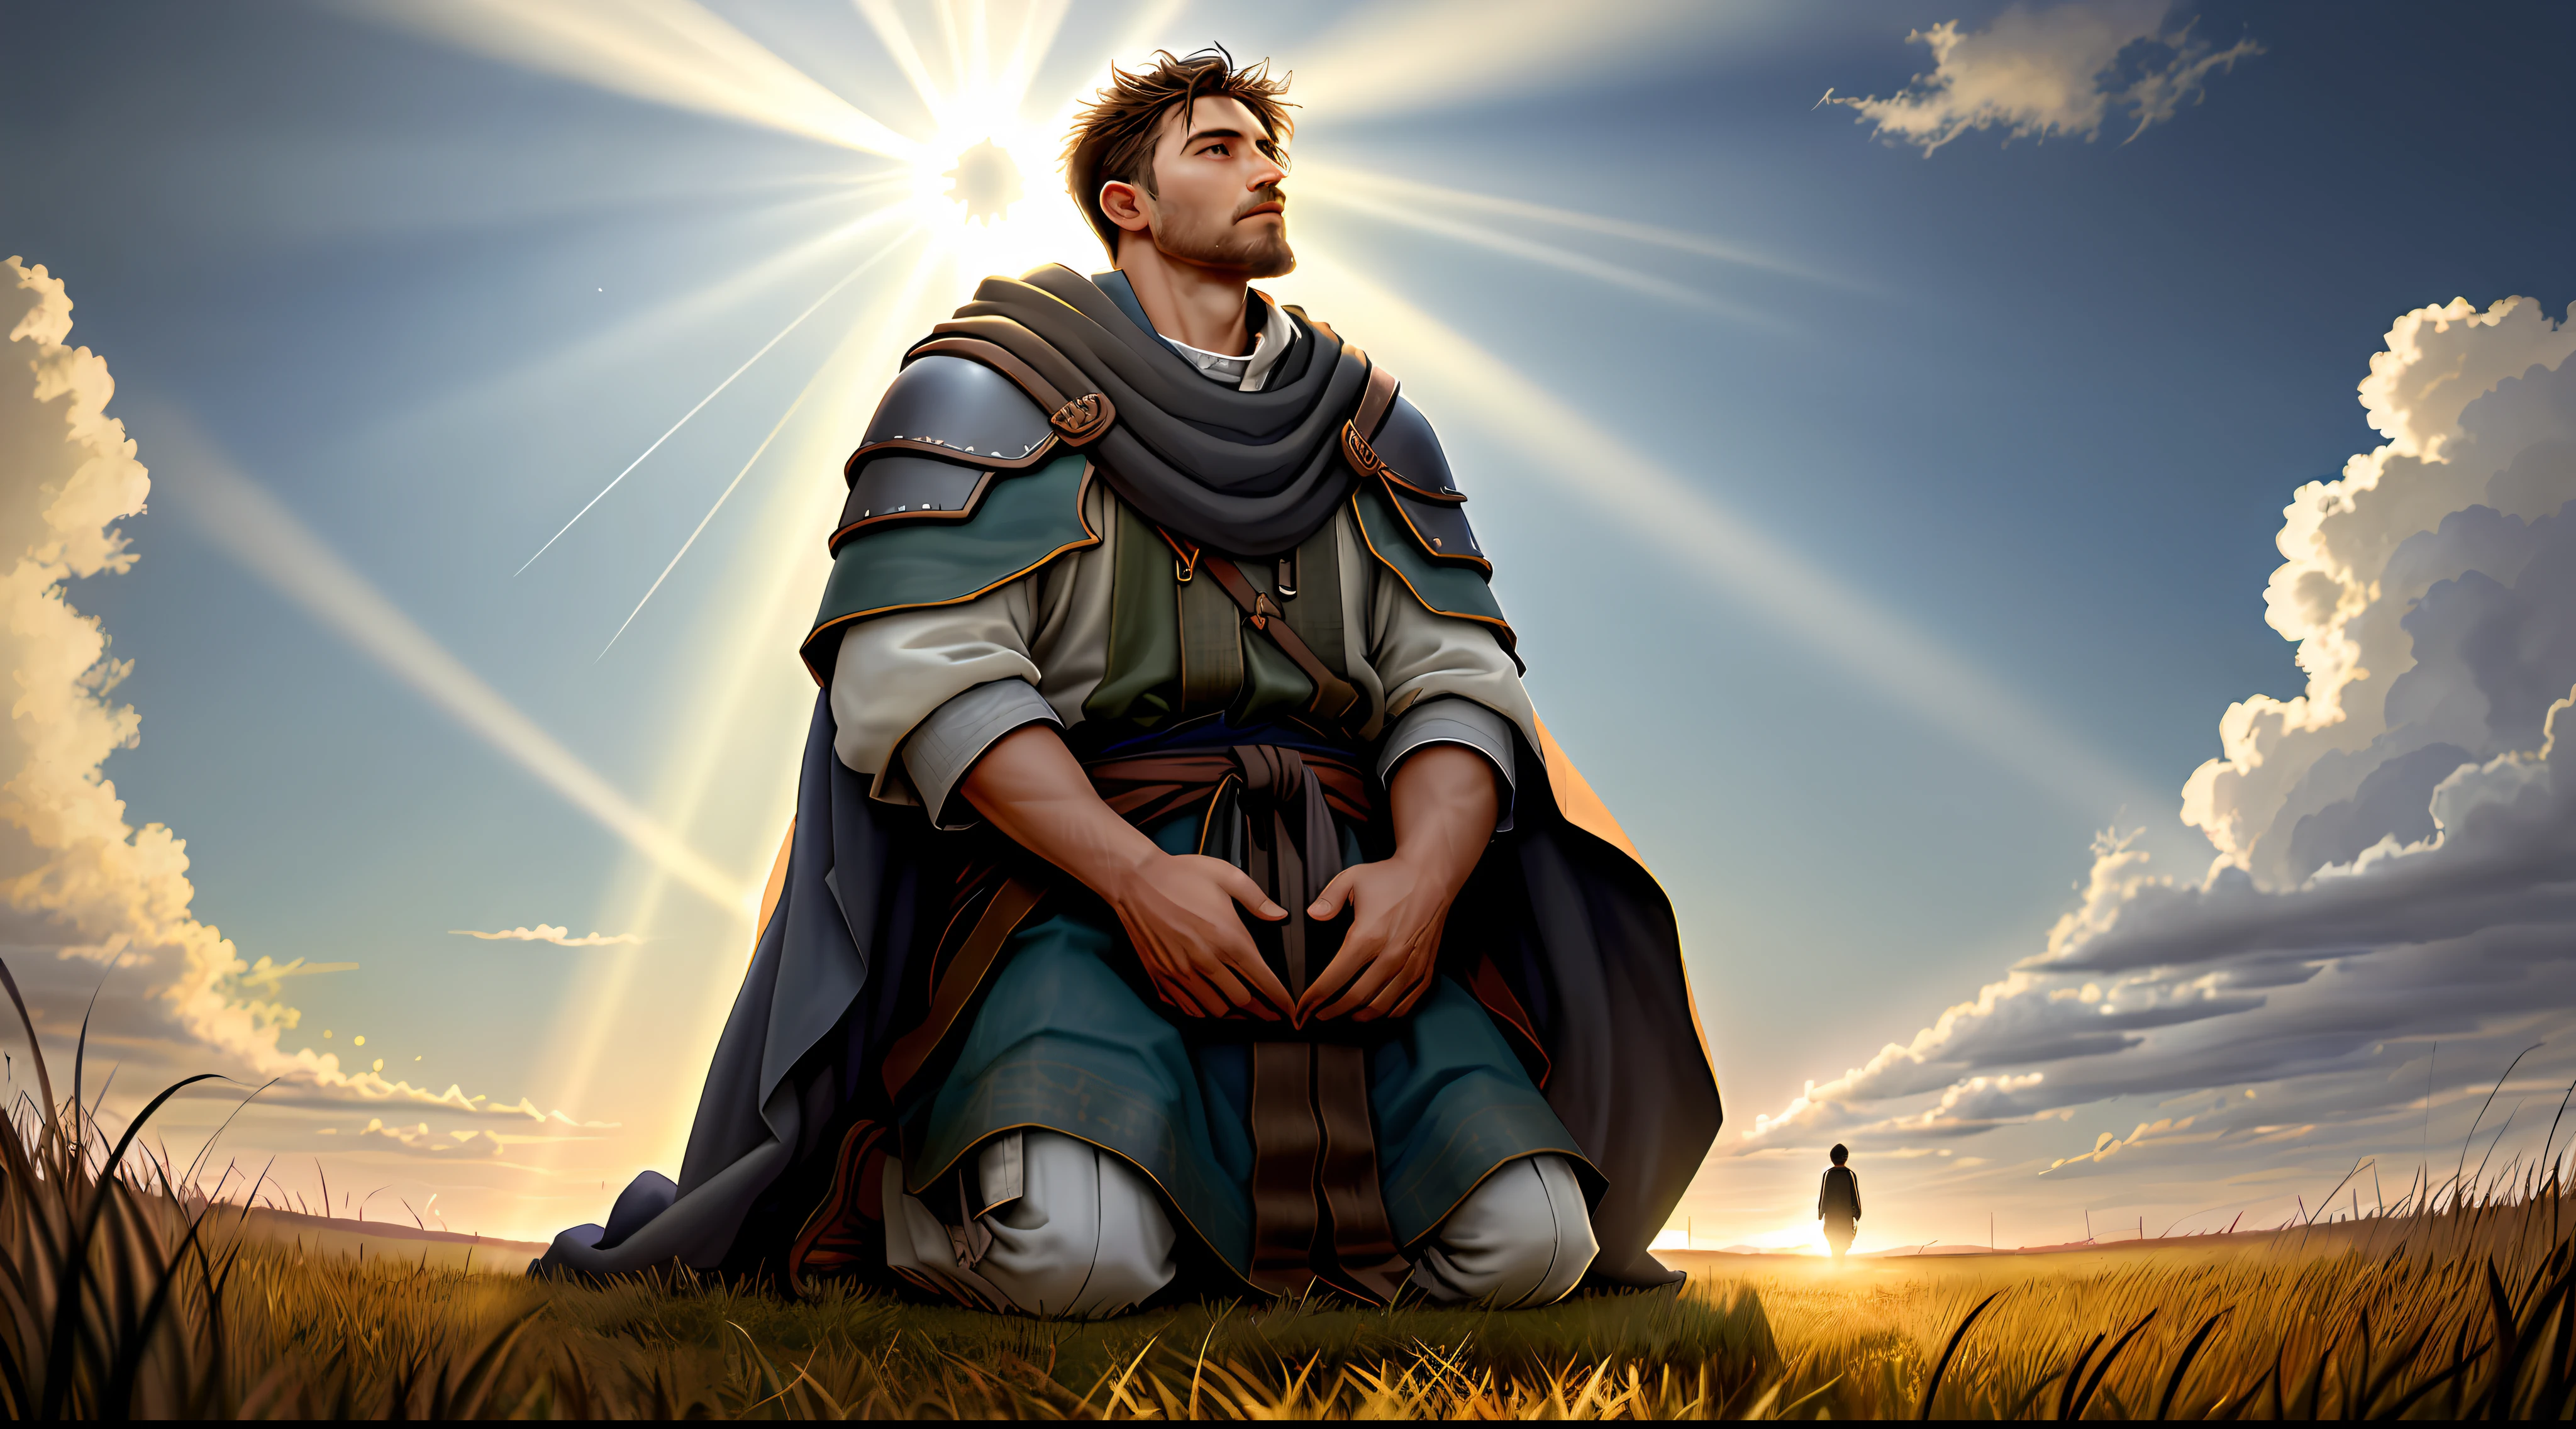 Jacob at least 40 years old kneeling in an open field, looking up at the sky, while rays of divine light descend on him, conveying the presence of God on his journey with clothes, features and scenes of biblical times, with detailed face